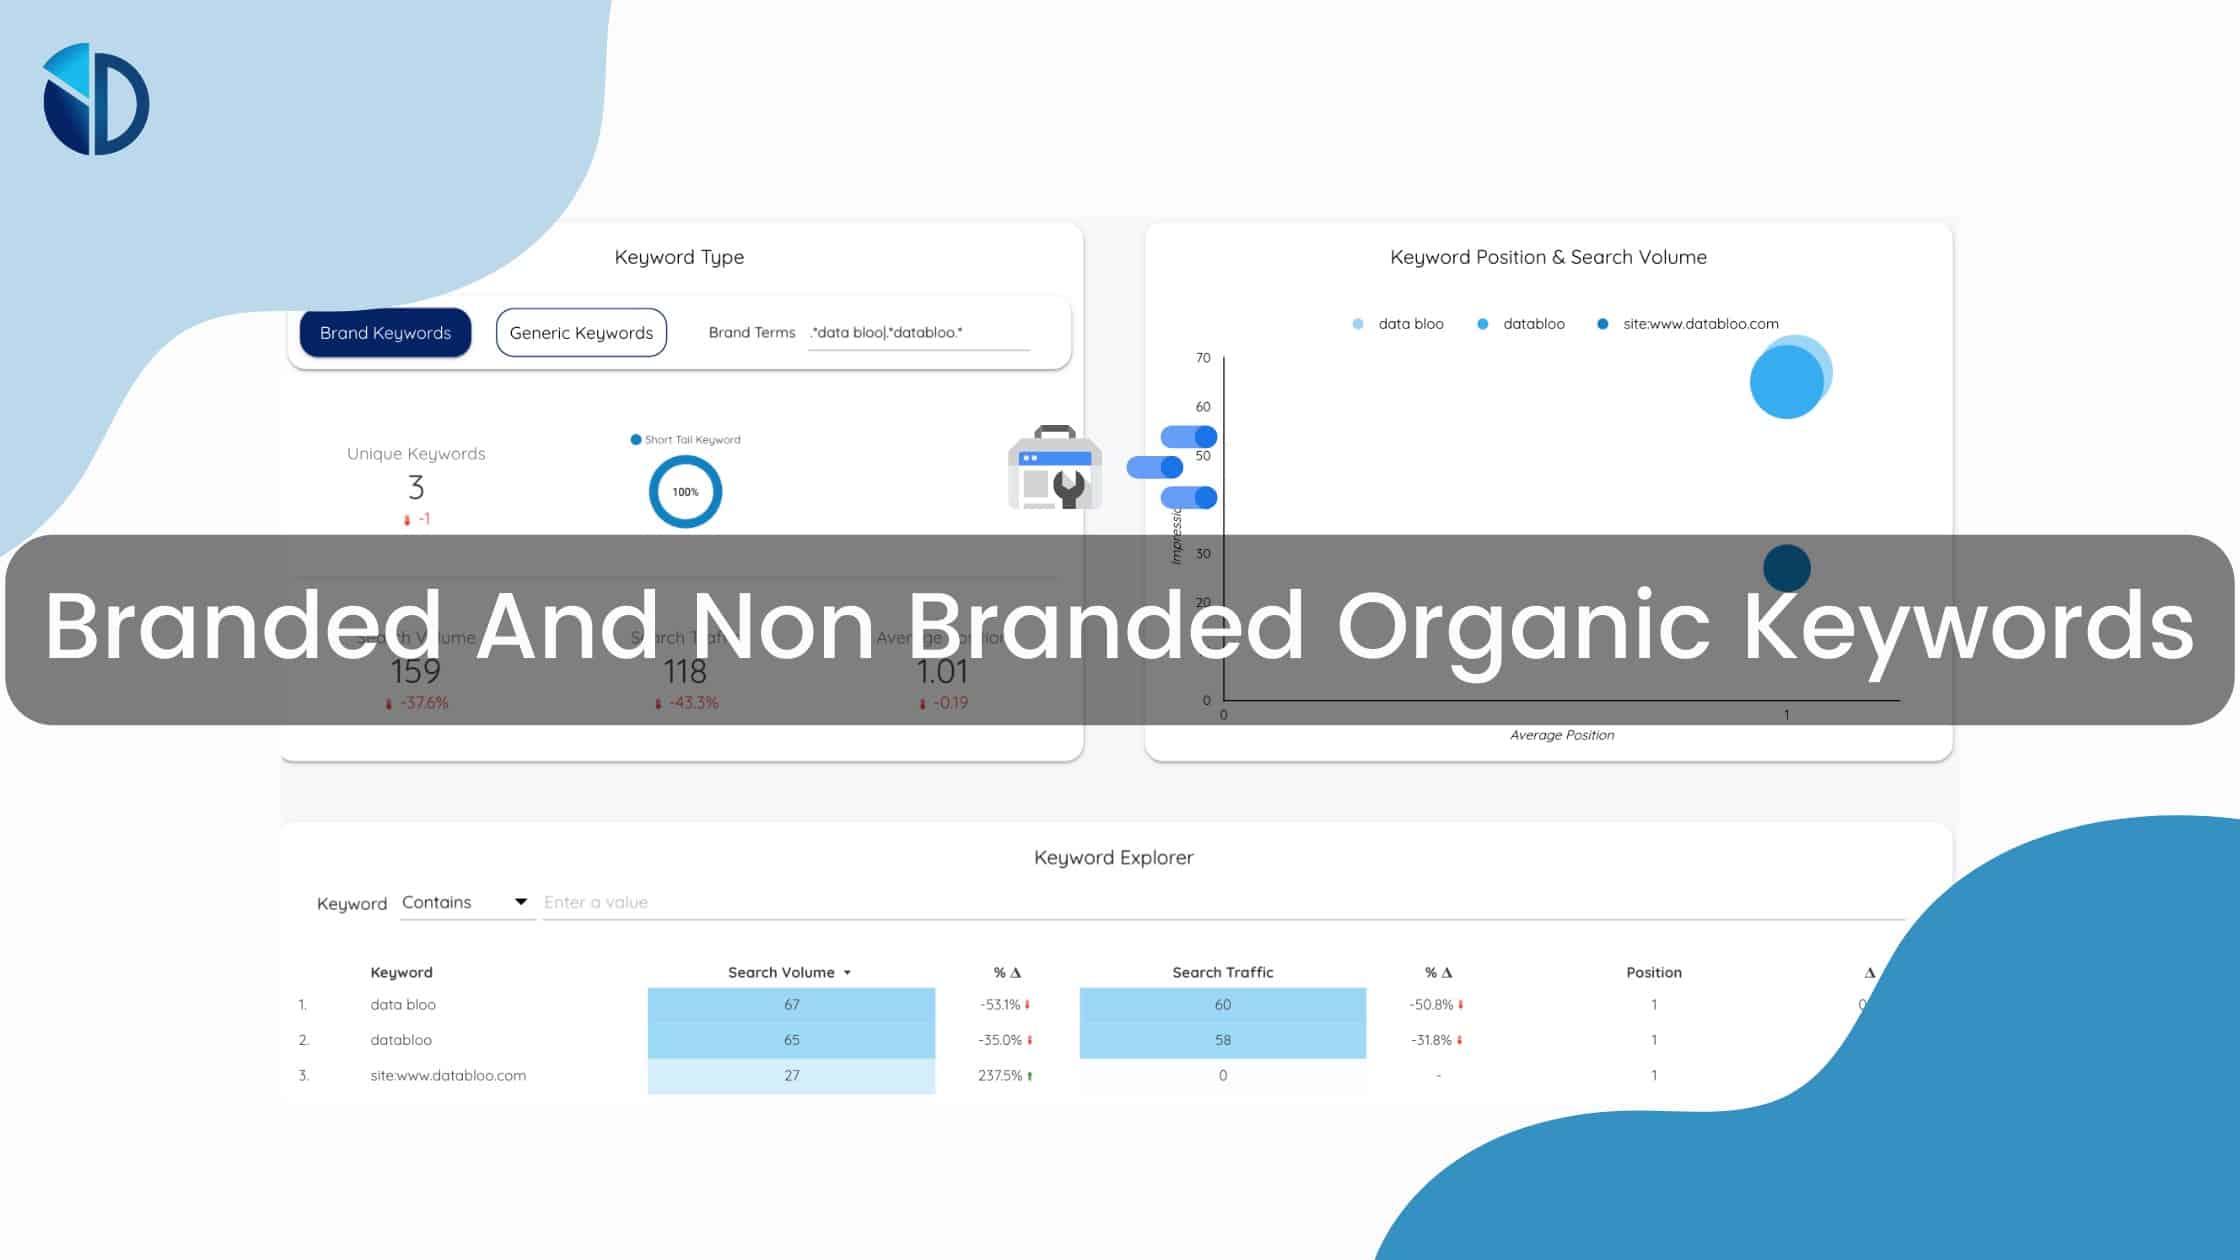 Branded And Non Branded Organic Keywords - Data Bloo